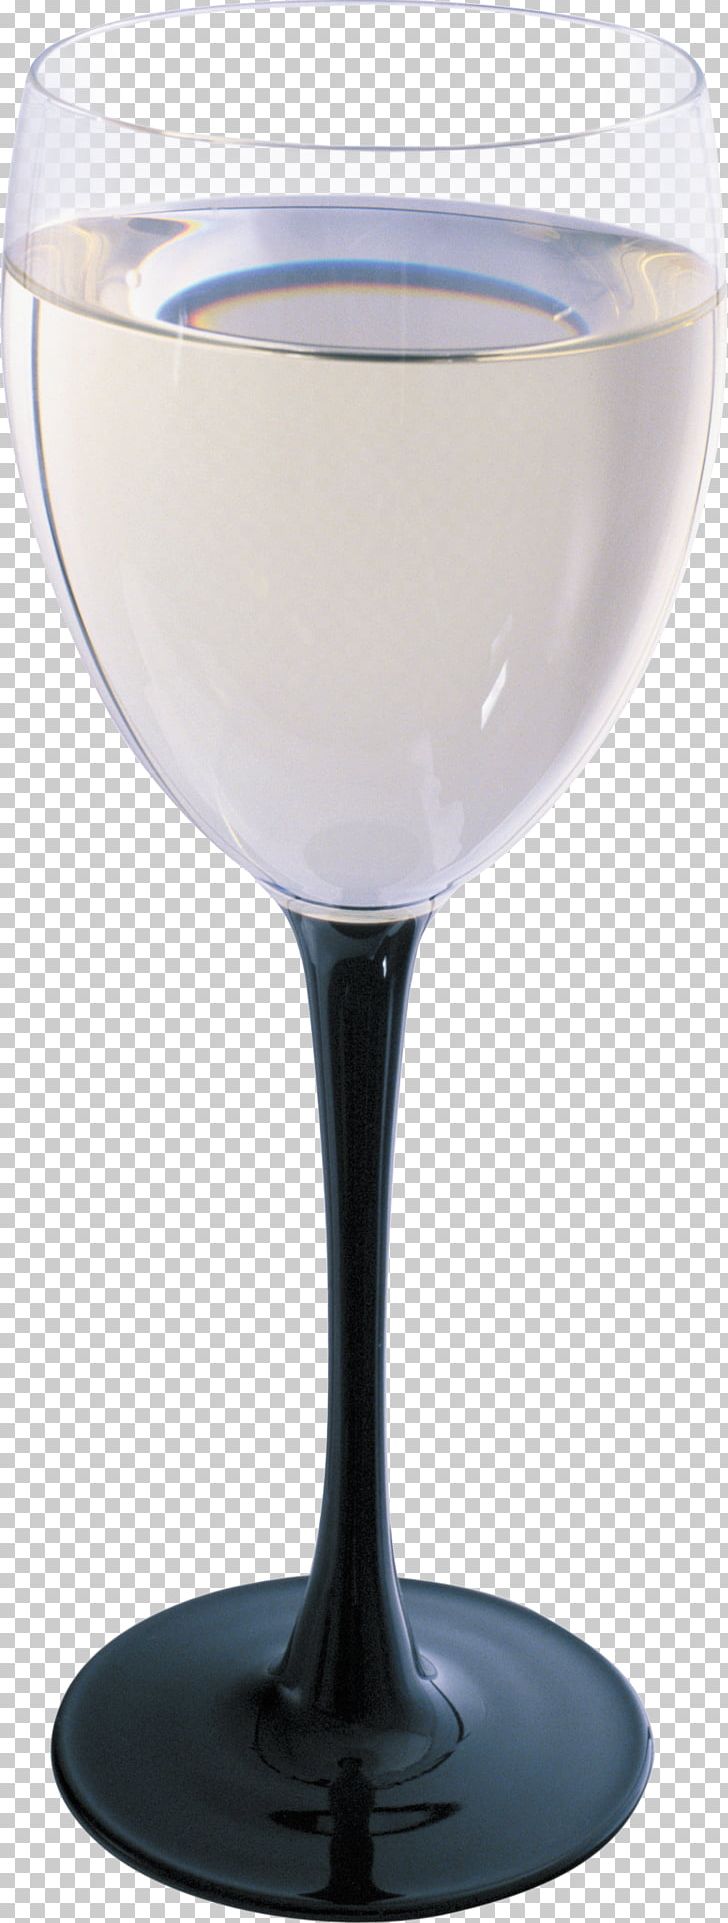 Wine Glass Champagne Glass White Wine PNG, Clipart, Barware, Bottle, Champagne, Champagne Glass, Champagne Stemware Free PNG Download